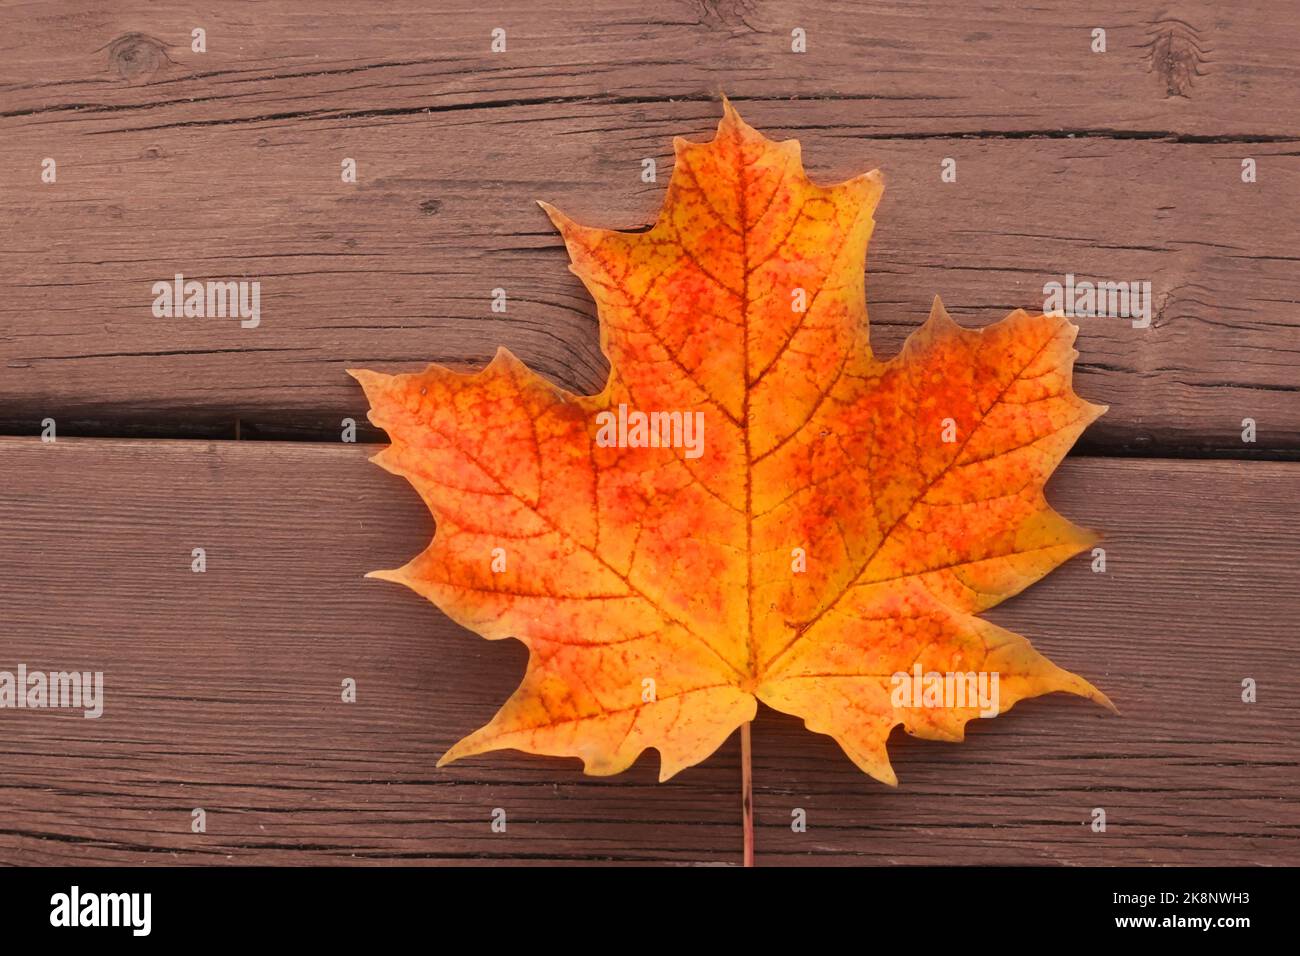 Coloured fall leaves on stained deck lumber Stock Photo